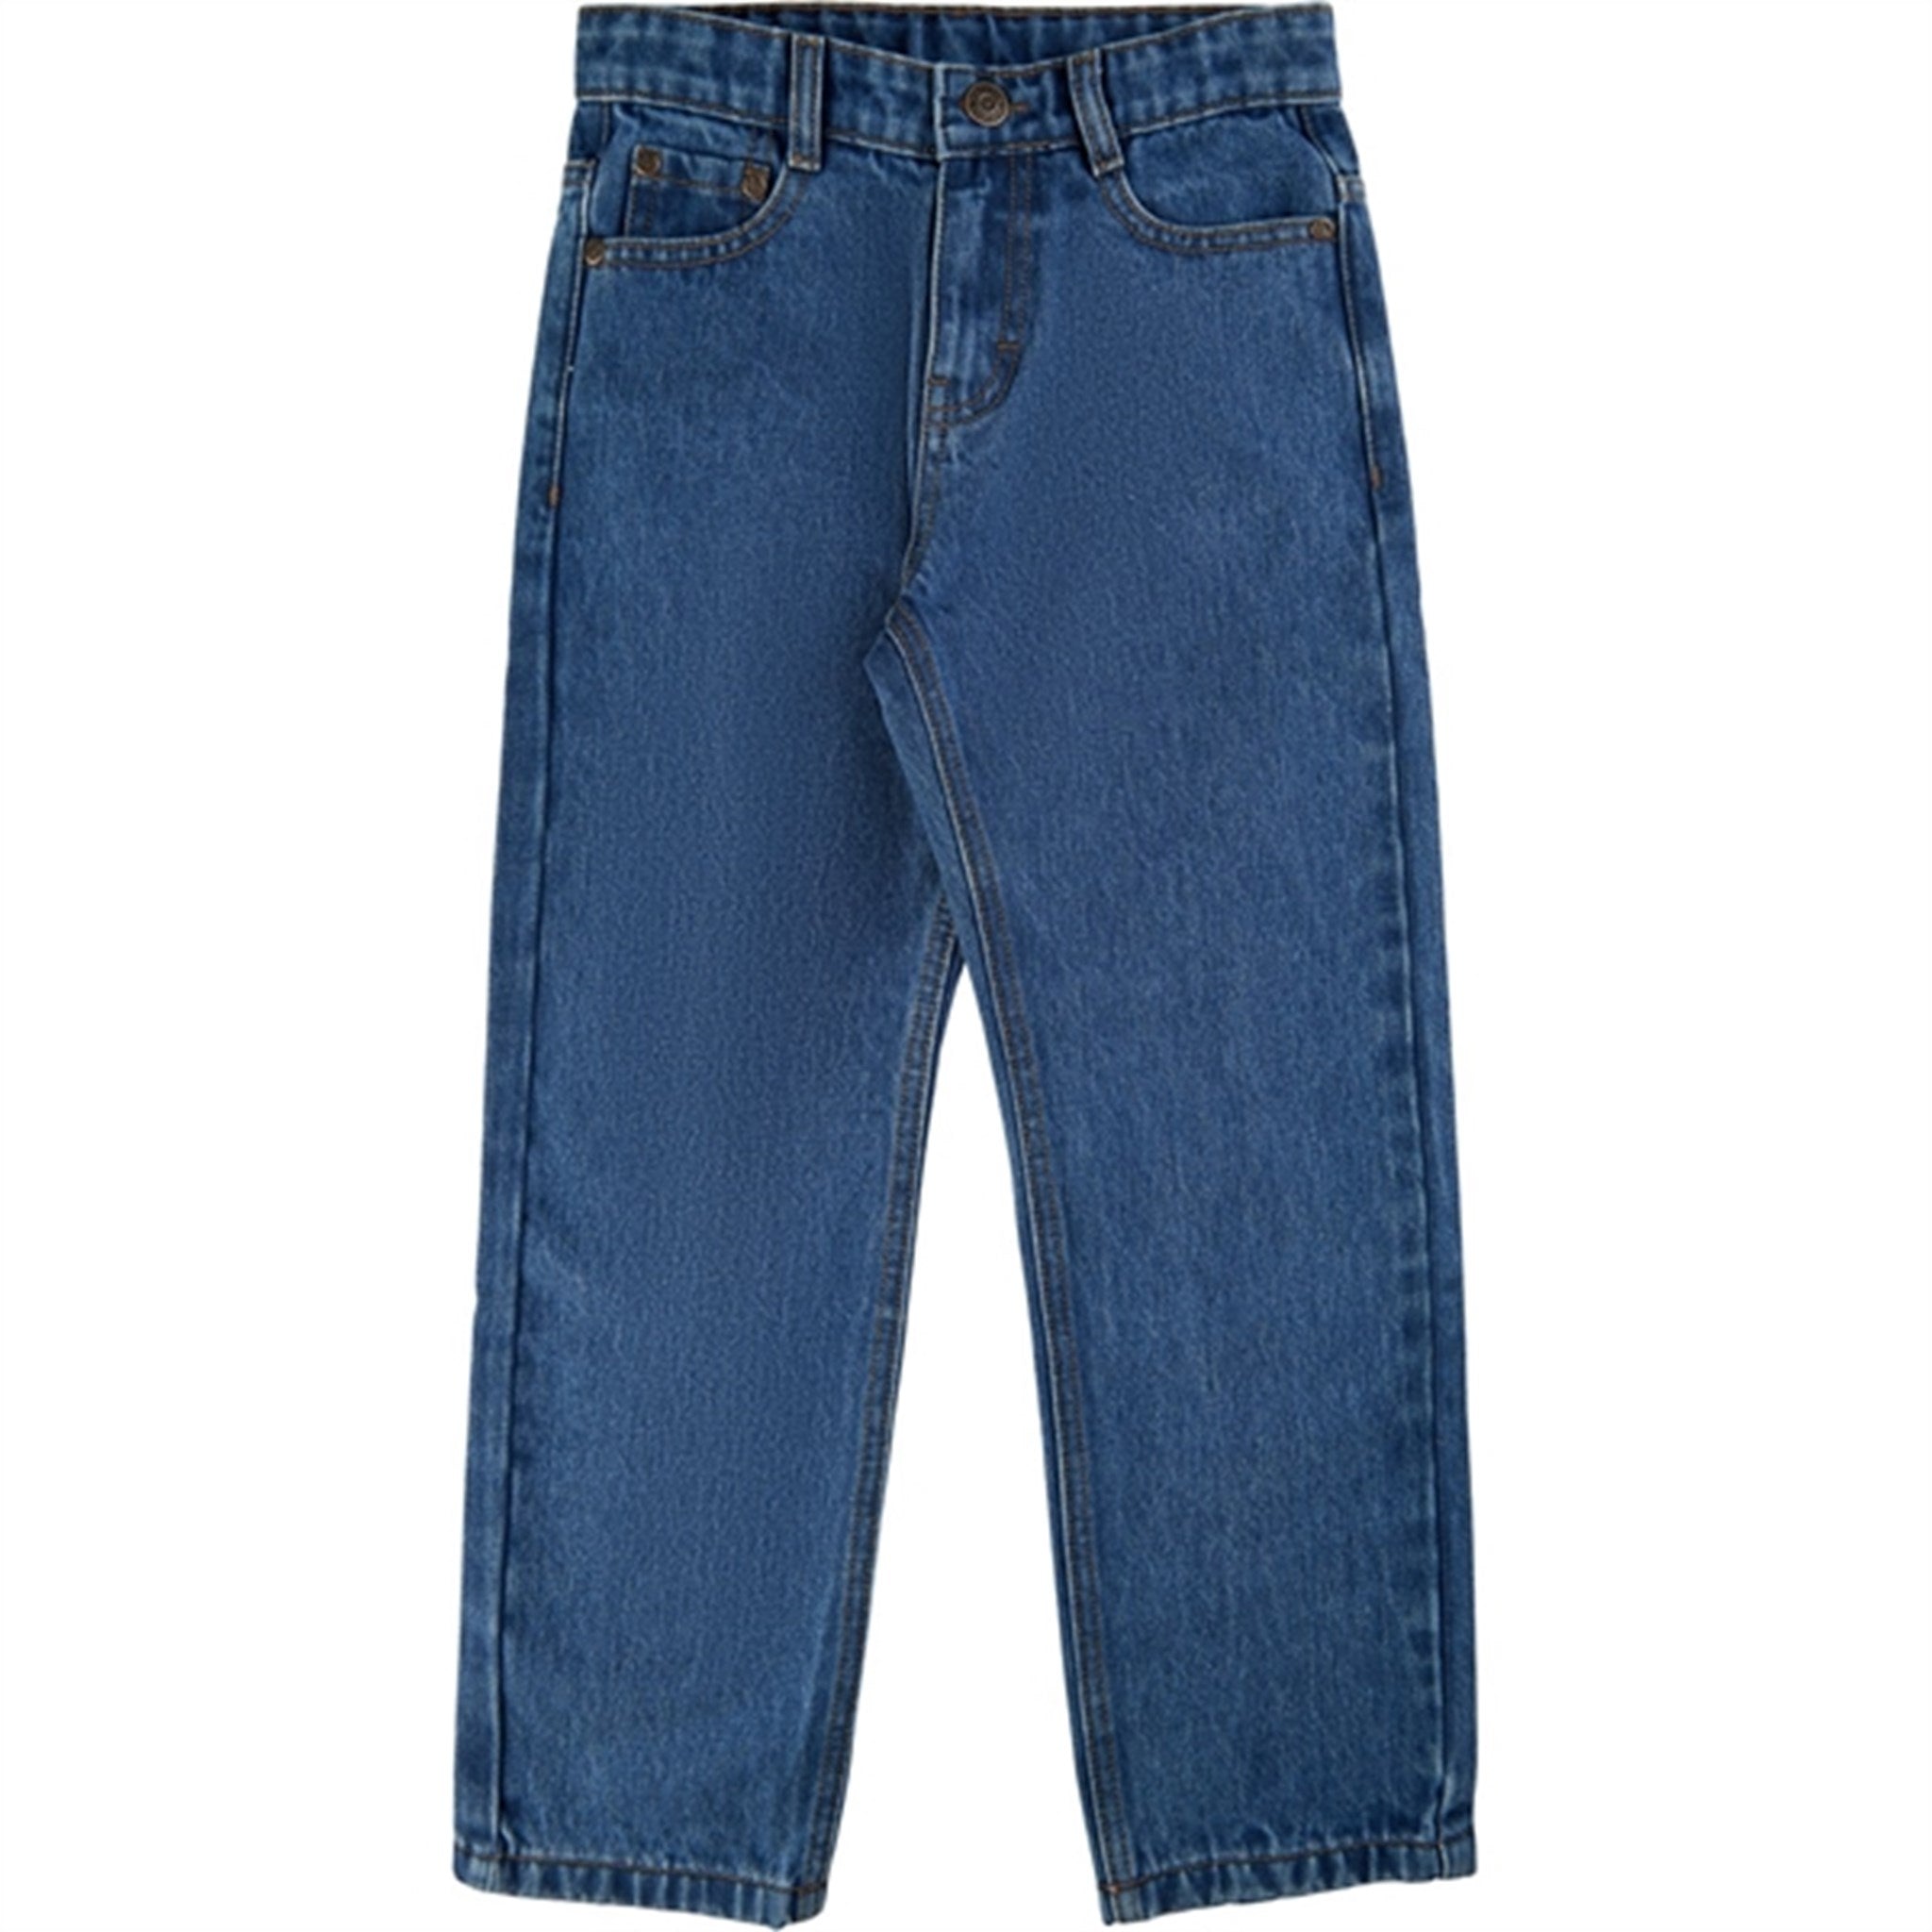 THE NEW Blue Denim Frede Loose Fit Jeans